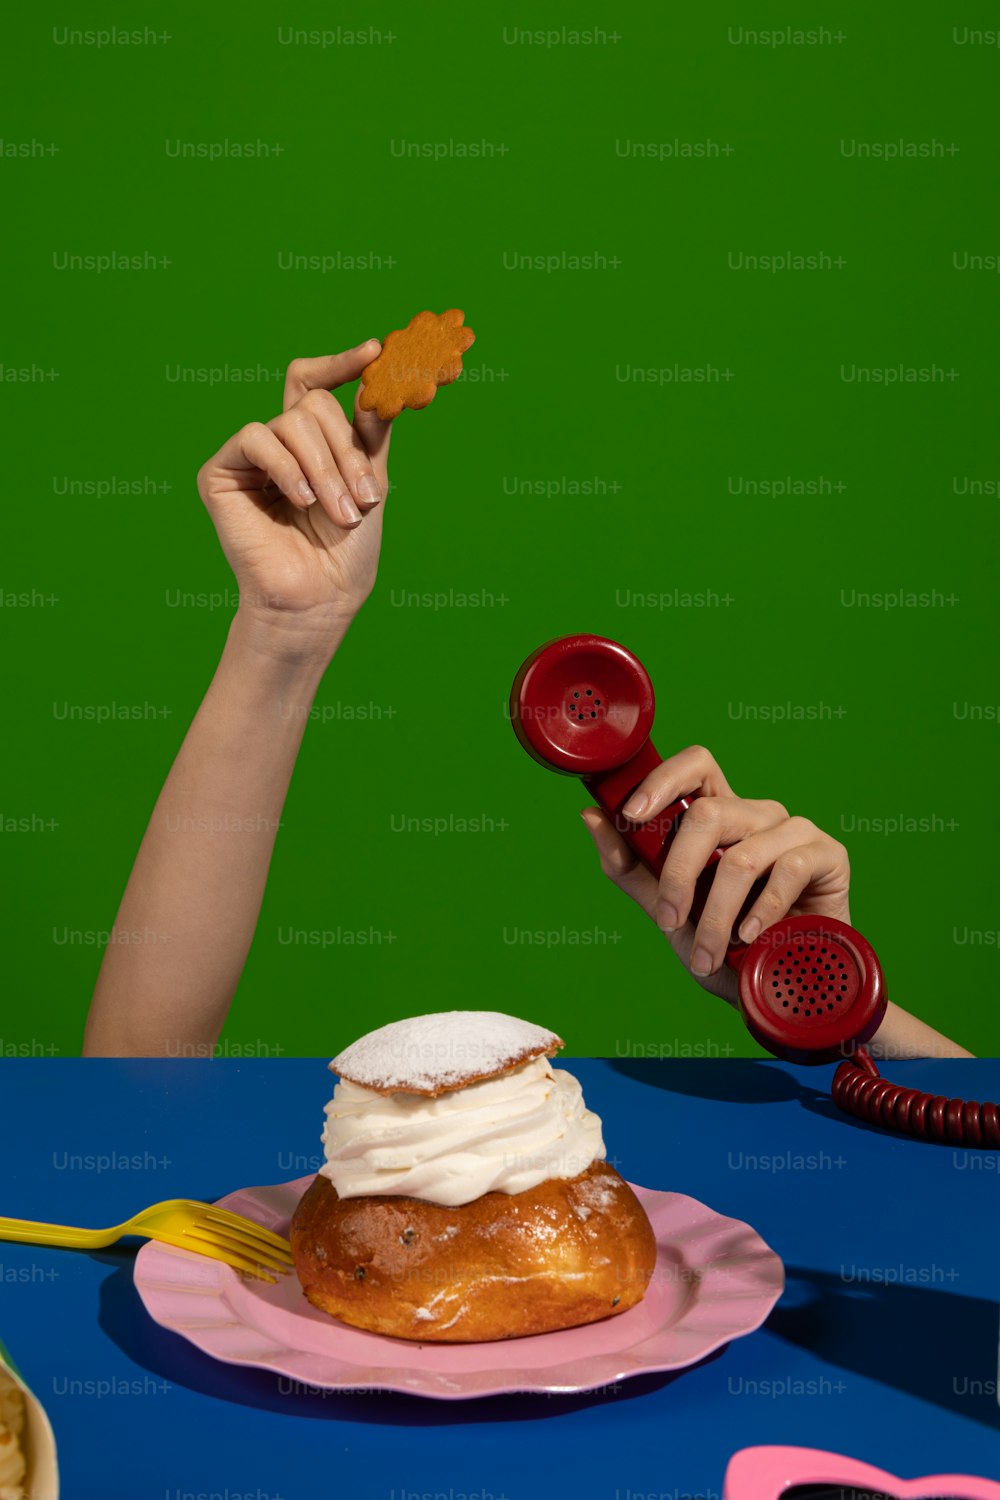 a woman holding a red phone next to a pastry on a pink plate